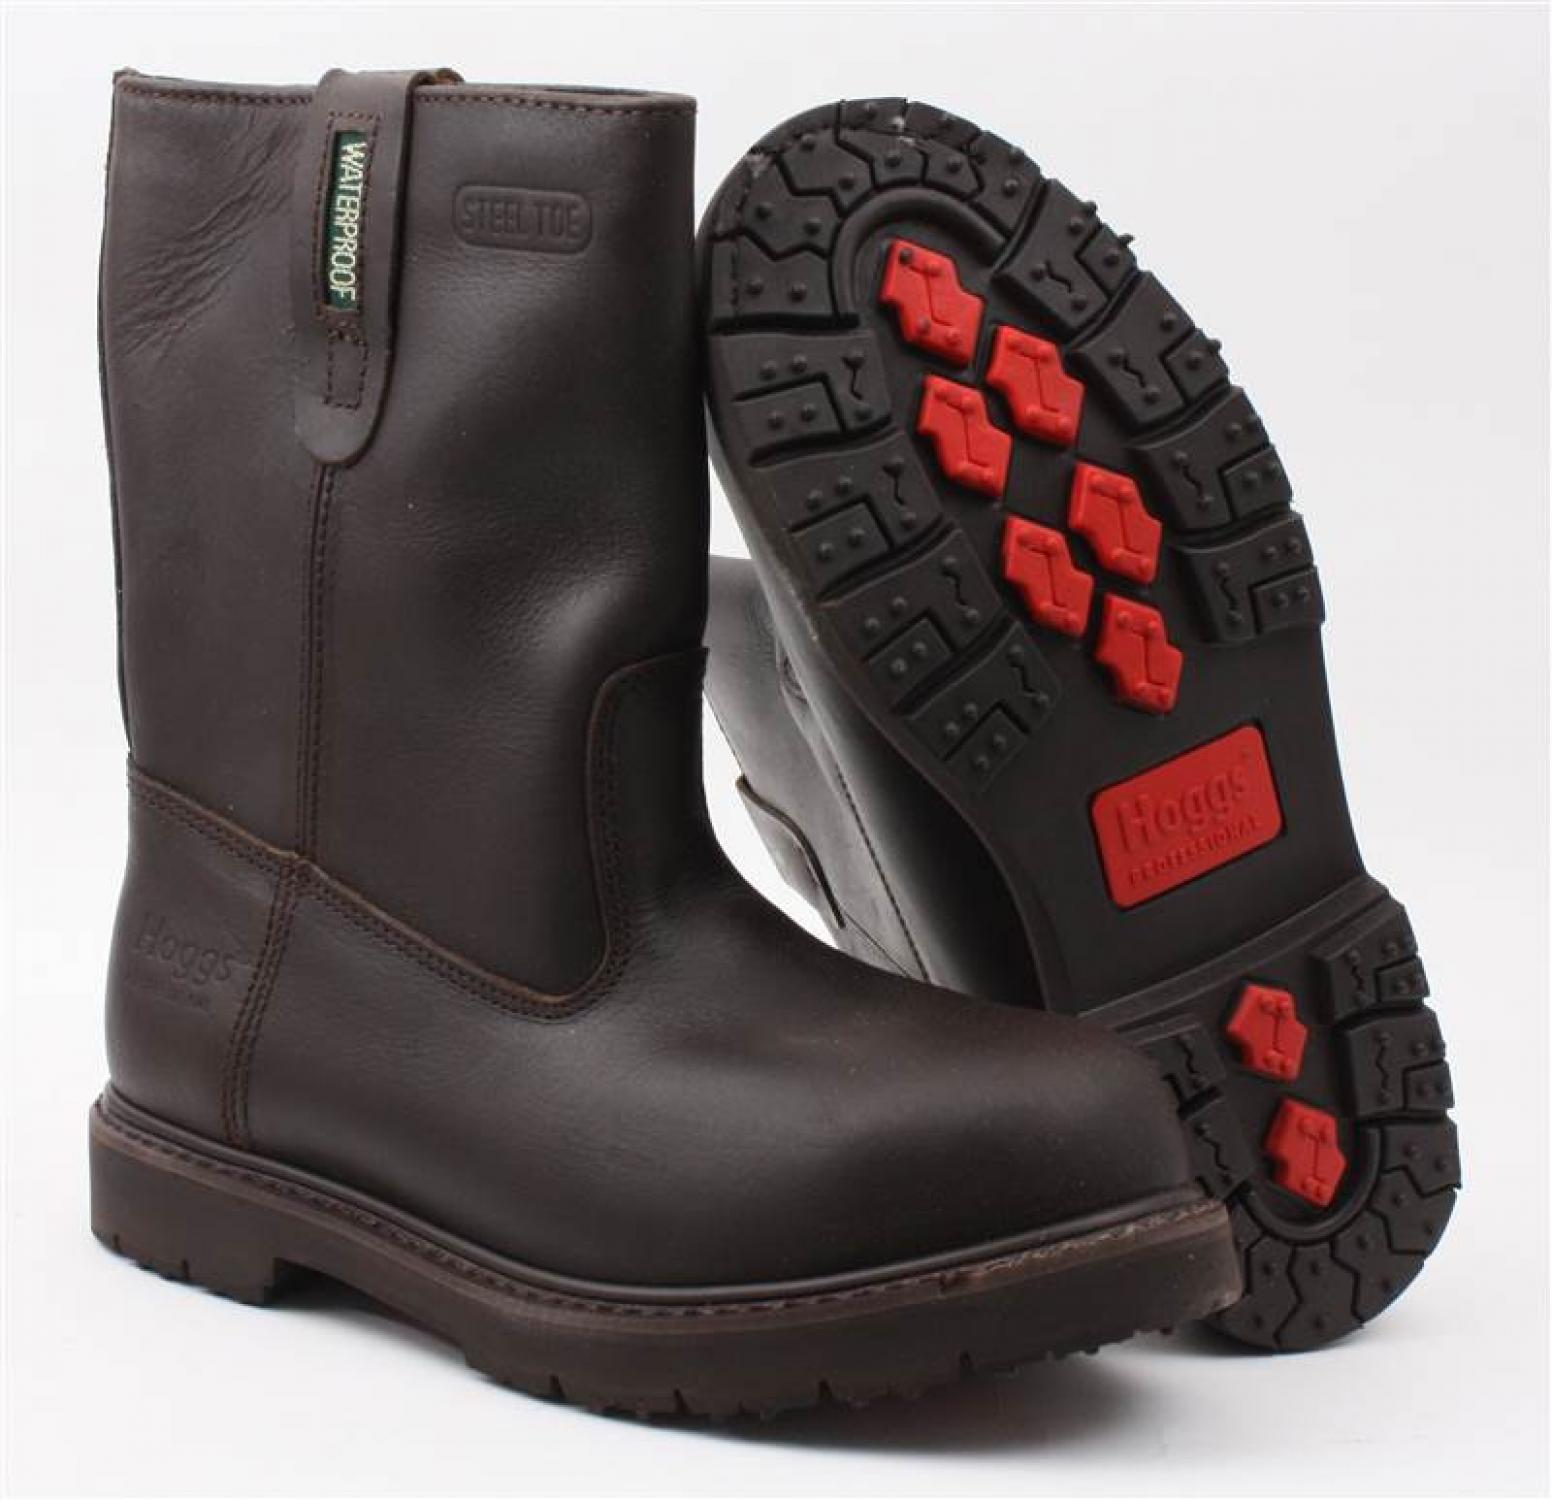 Buy Hoggs Aquasafe Safety Rigger Boot 